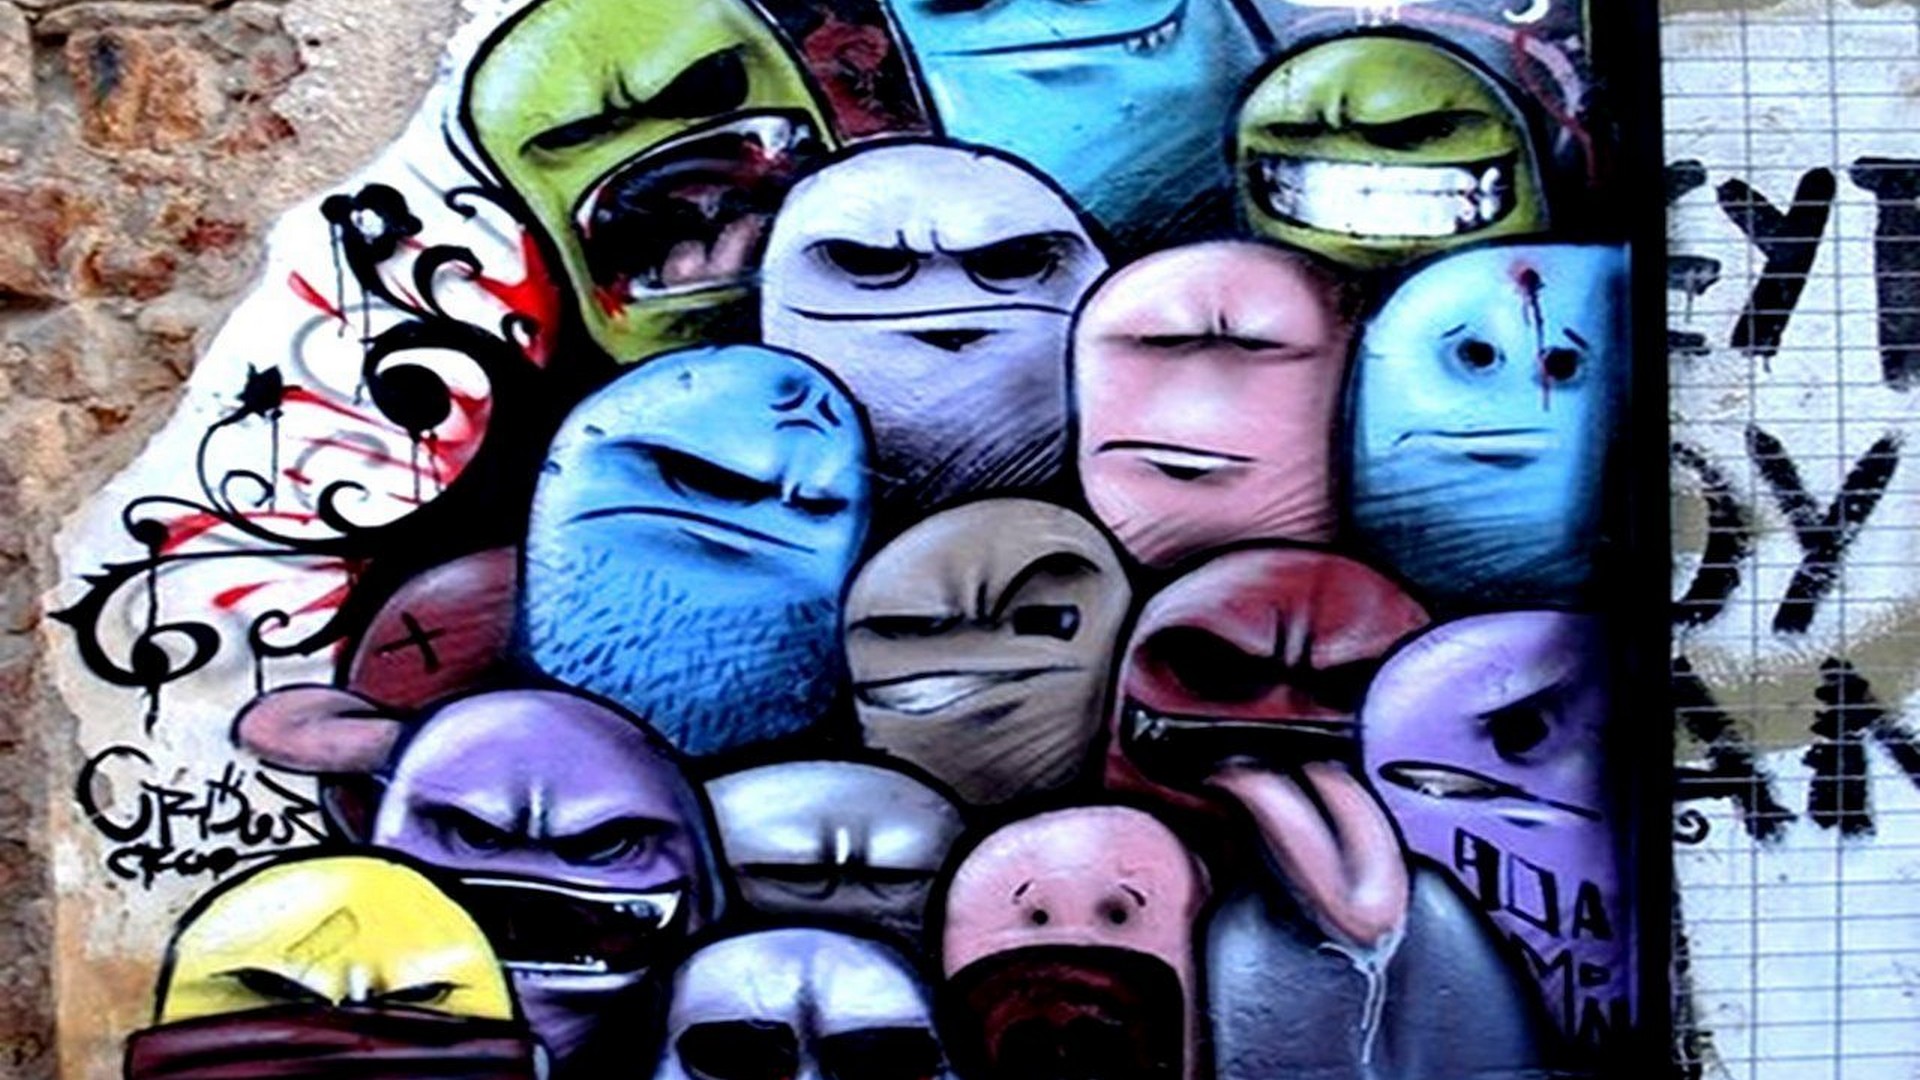 Street Art Wallpaper HD with image resolution 1920x1080 pixel. You can make this wallpaper for your Desktop Computer Backgrounds, Mac Wallpapers, Android Lock screen or iPhone Screensavers